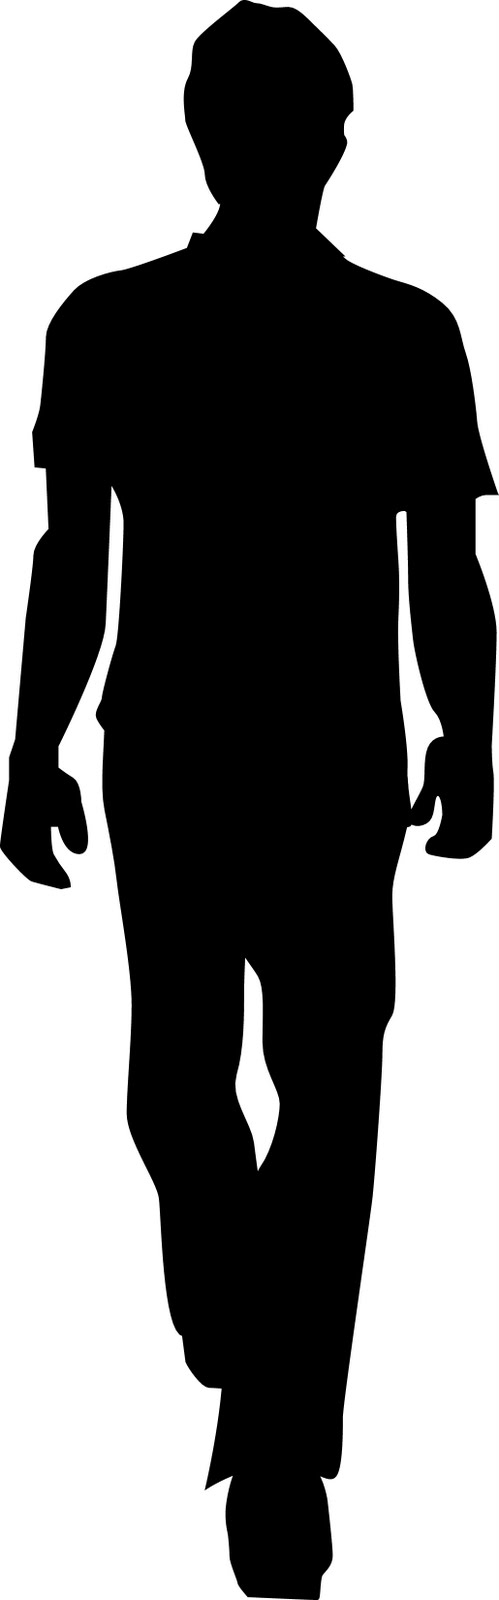 10 Walking Person Silhouette  - Person Walking Clipart